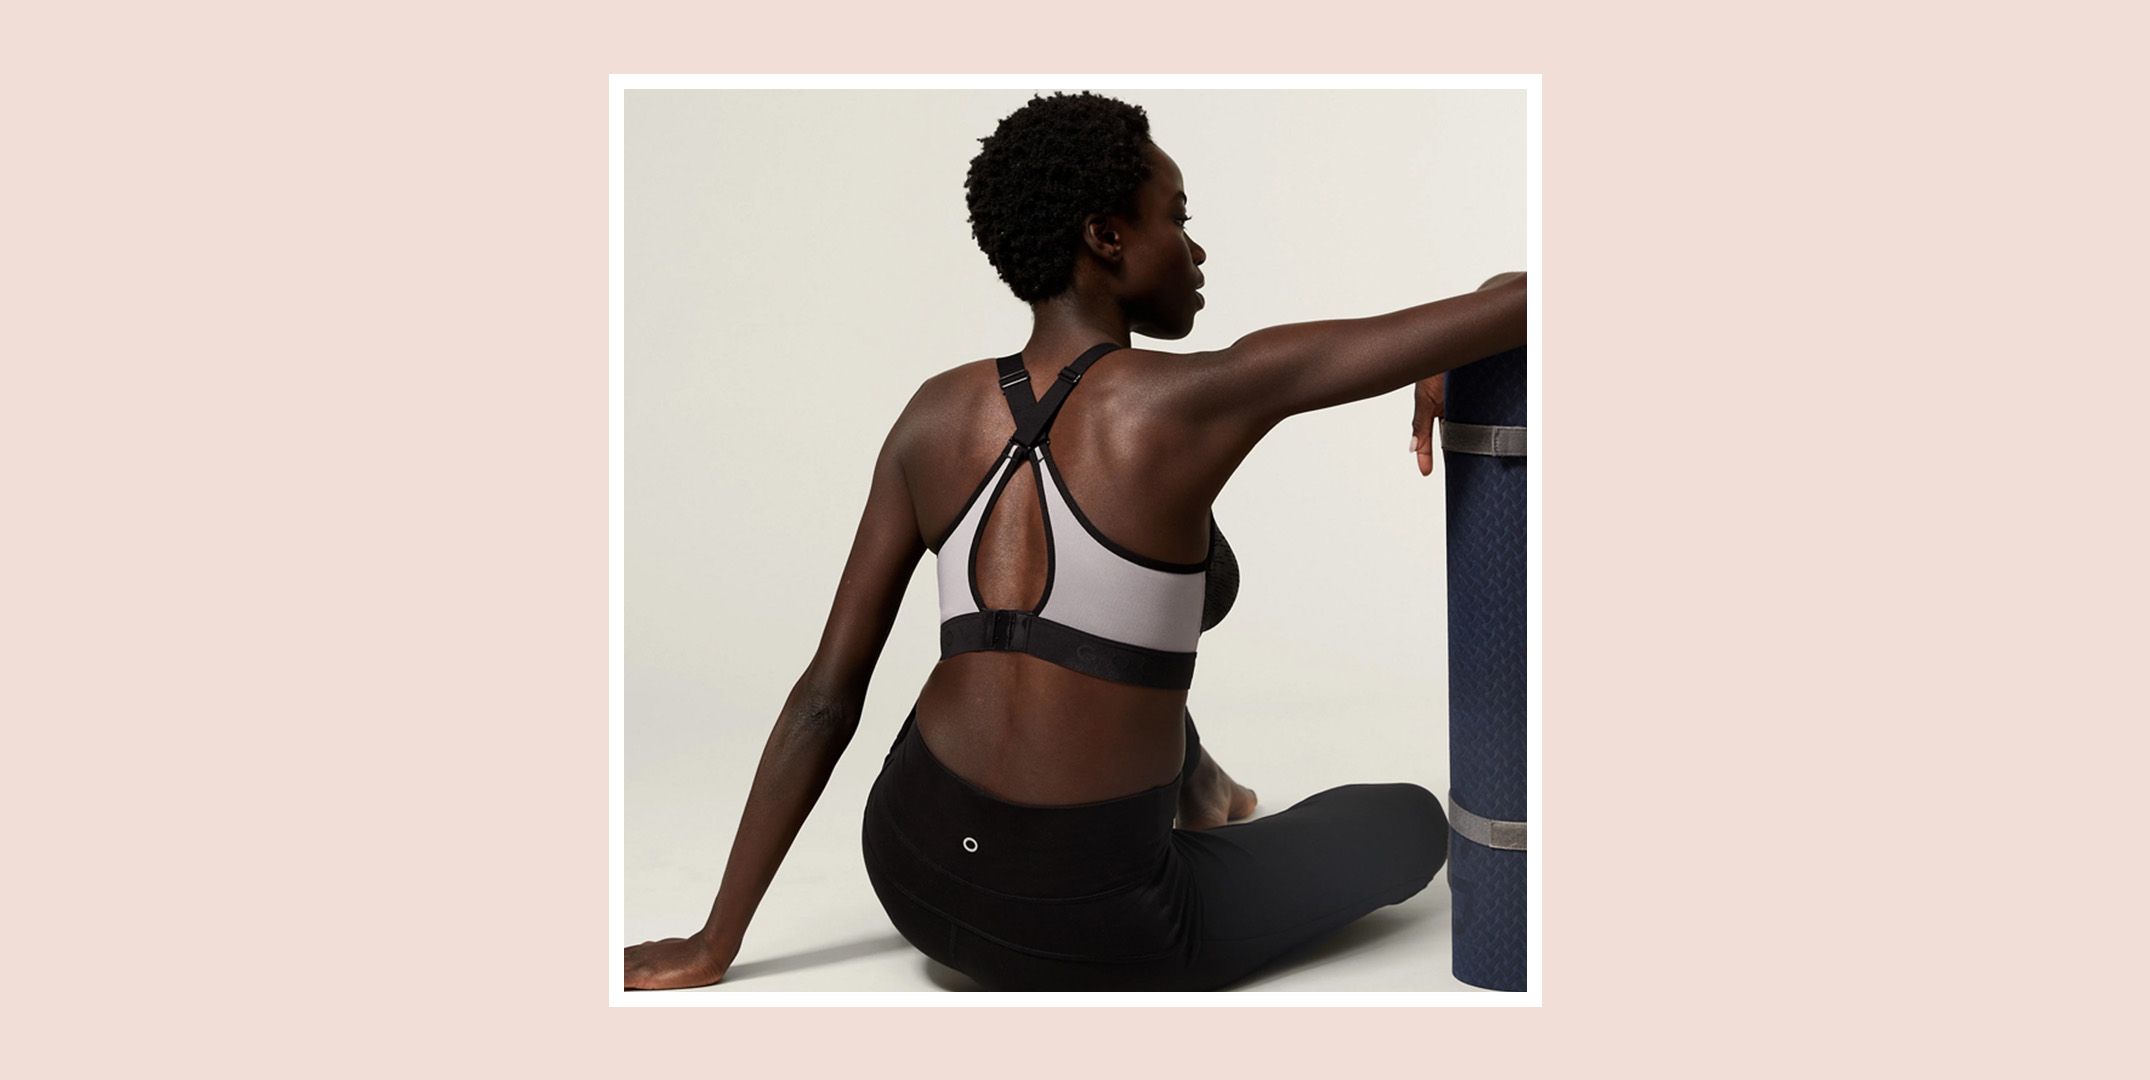 Marks and Spencer - At-home workouts lost their shine? Give them a  much-needed boost with our new Goodmove collection. 📸 M&S Aberdeen store  team leader Sam. Bra:  Leggings